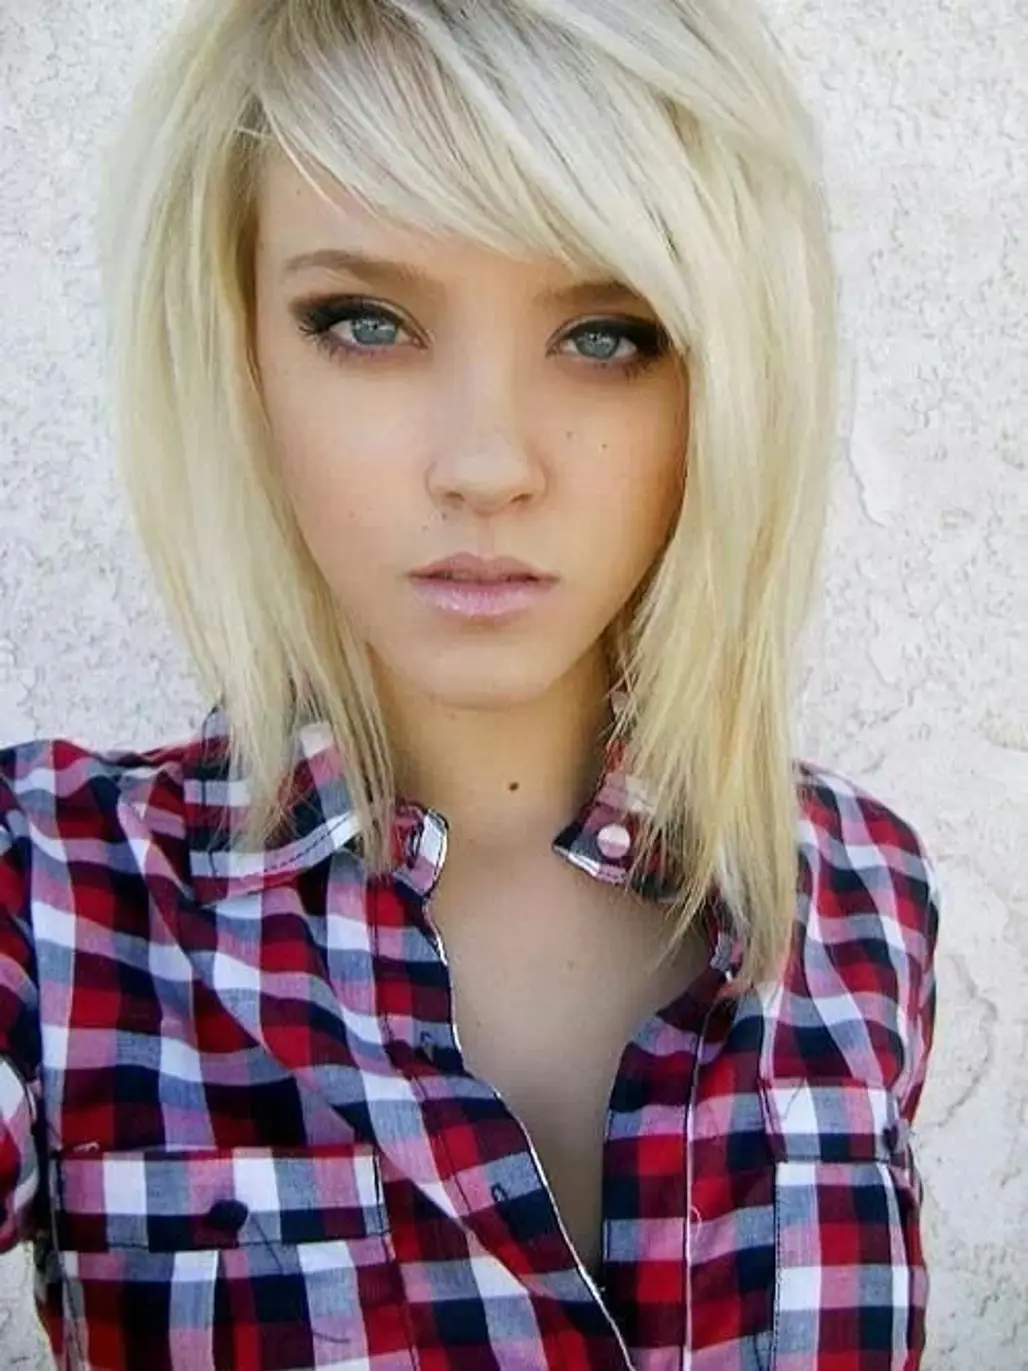 hair,human hair color,blond,face,hairstyle,